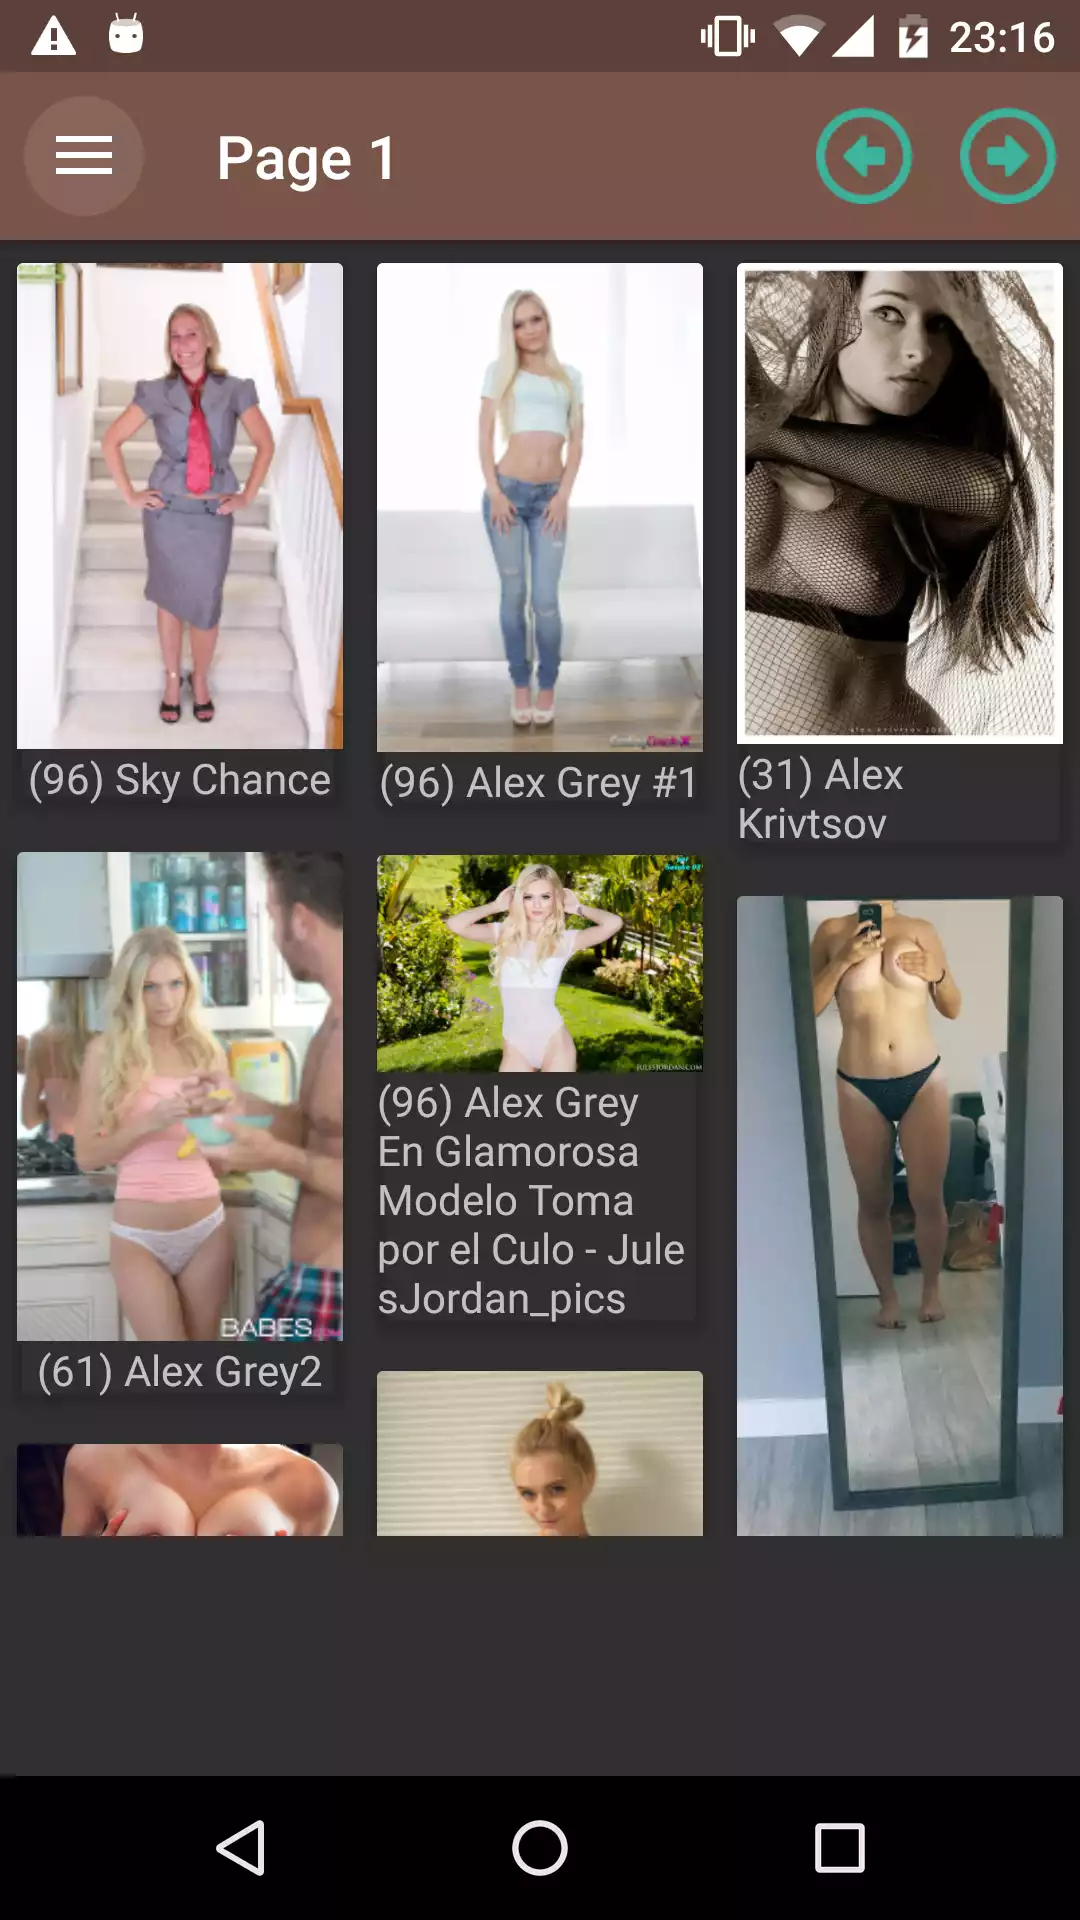 alex-chance apps,site,free,backgrounds,photo,updates,app,sexy,wallpaper,best,pics,hentai,pictures,erotic,hentia,editor,comics,gallery,porn,image,galleries,wallpapers,shemale